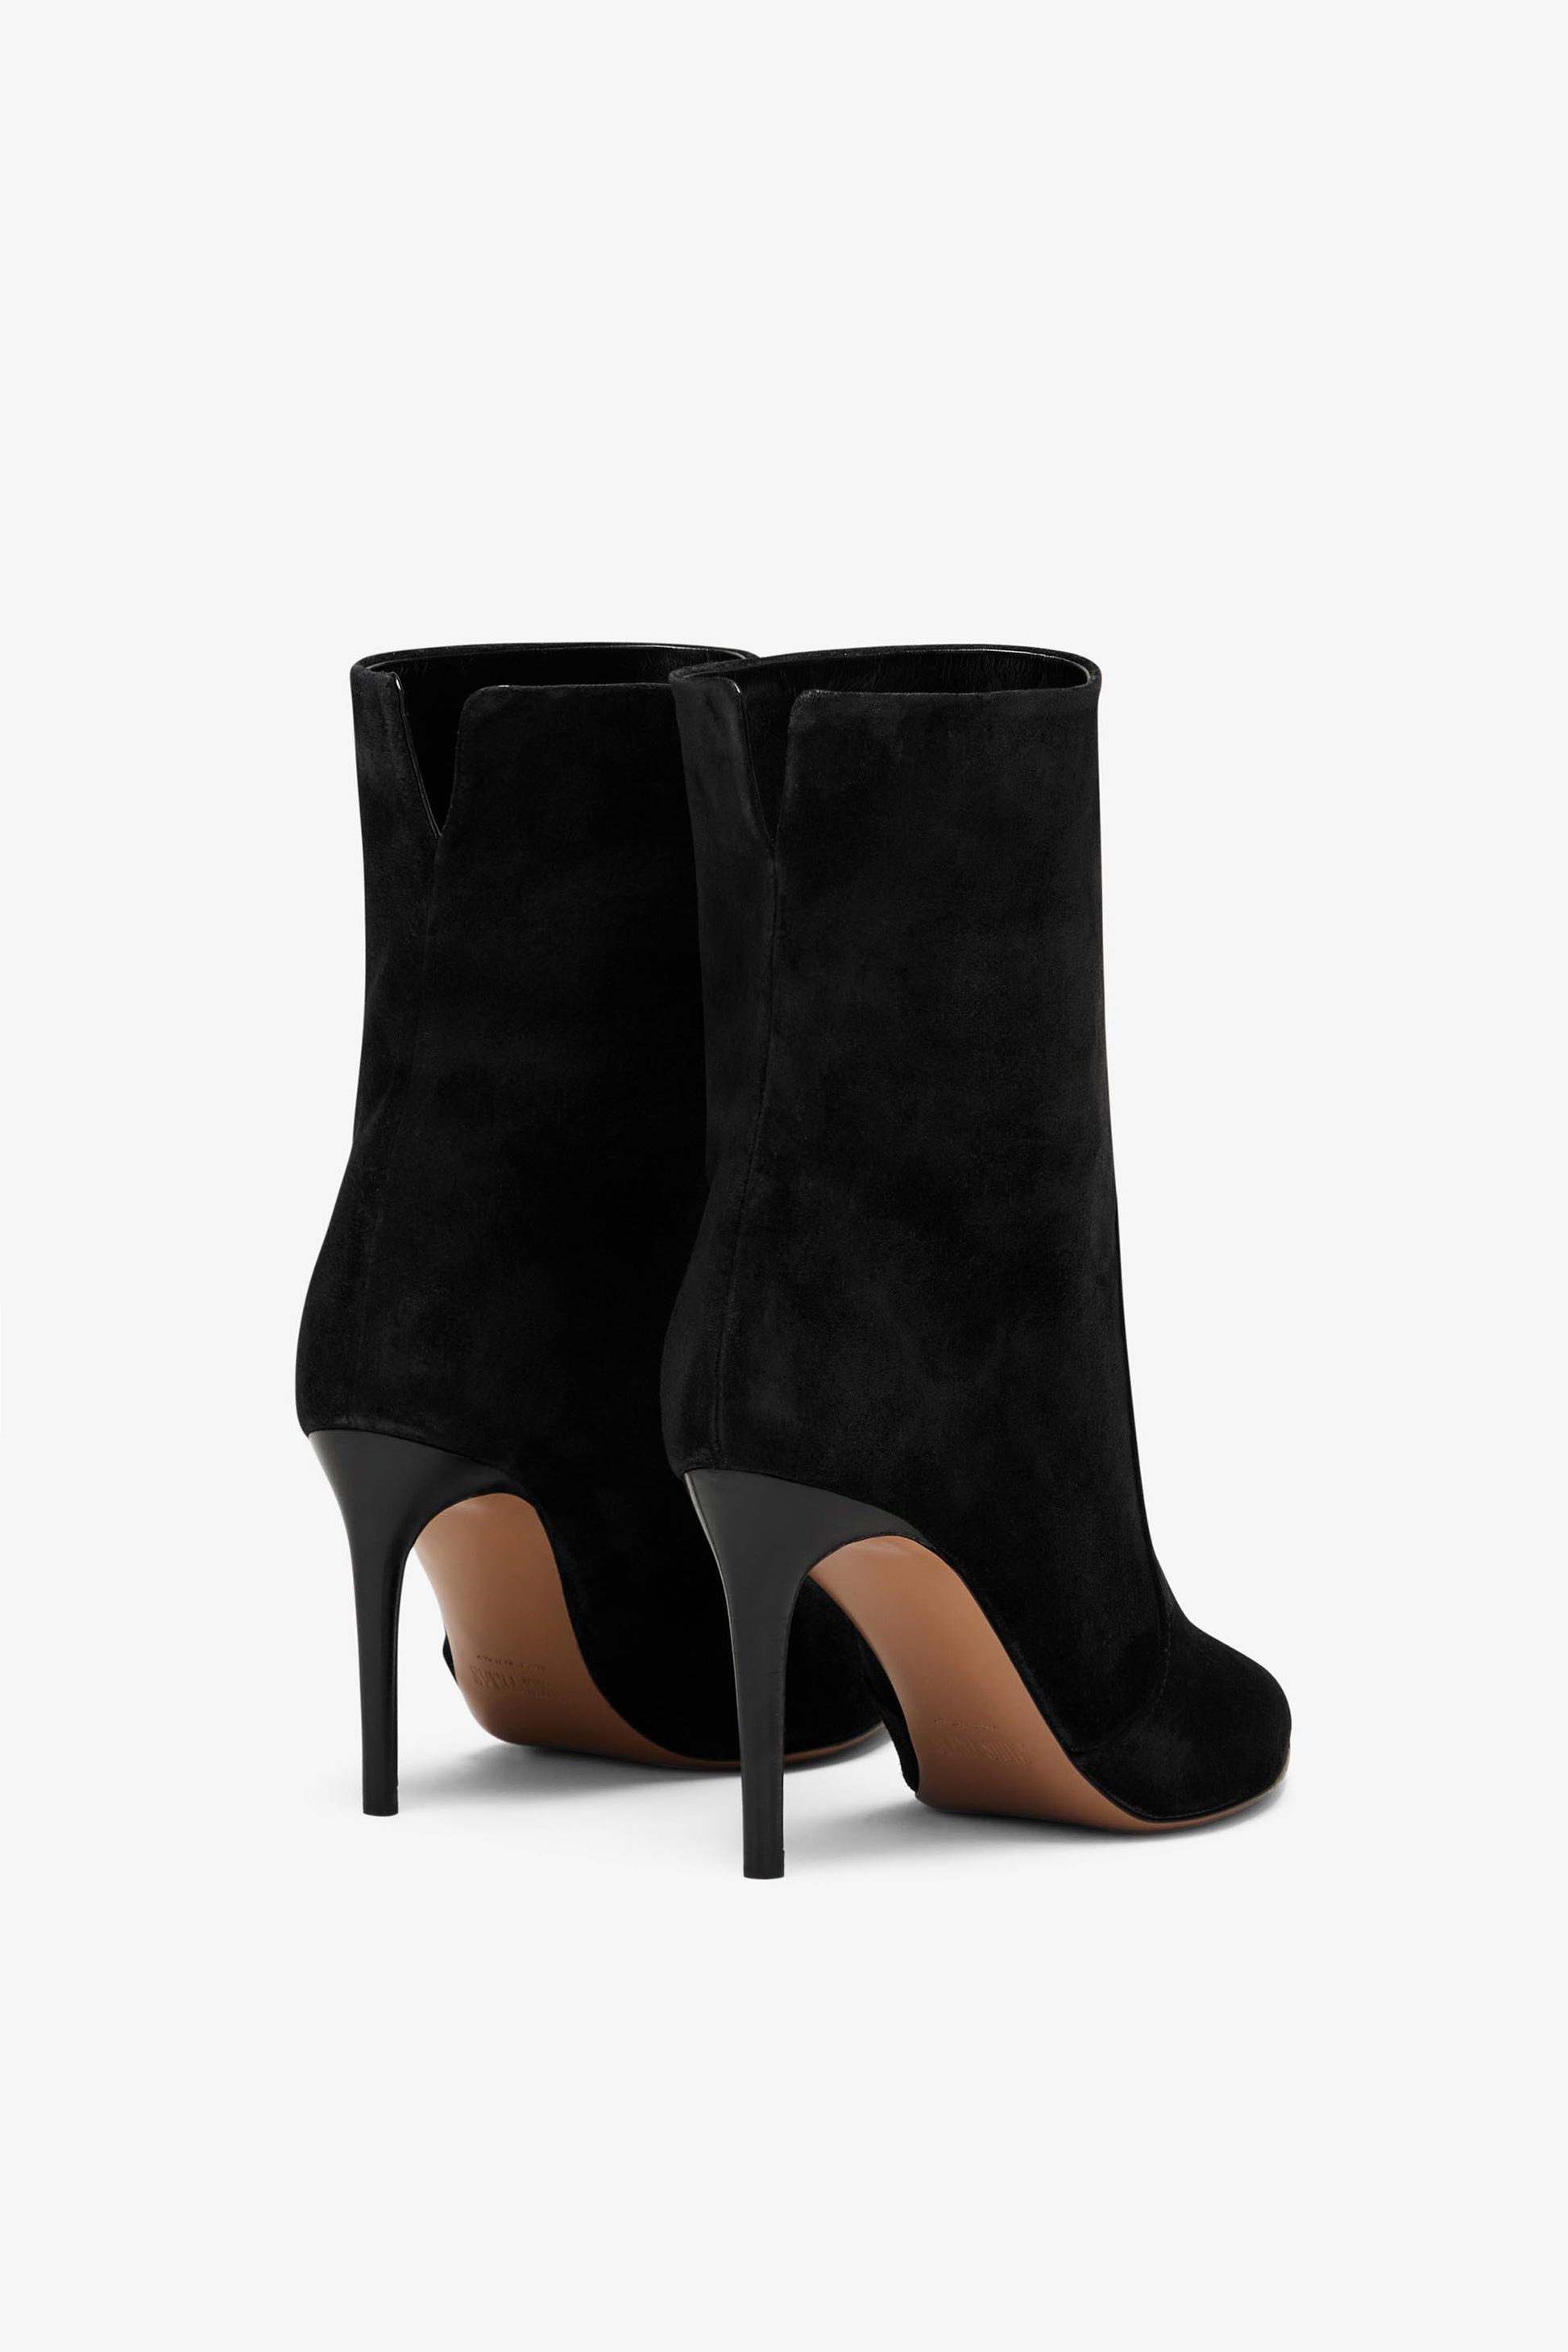 Black suede ankle boot